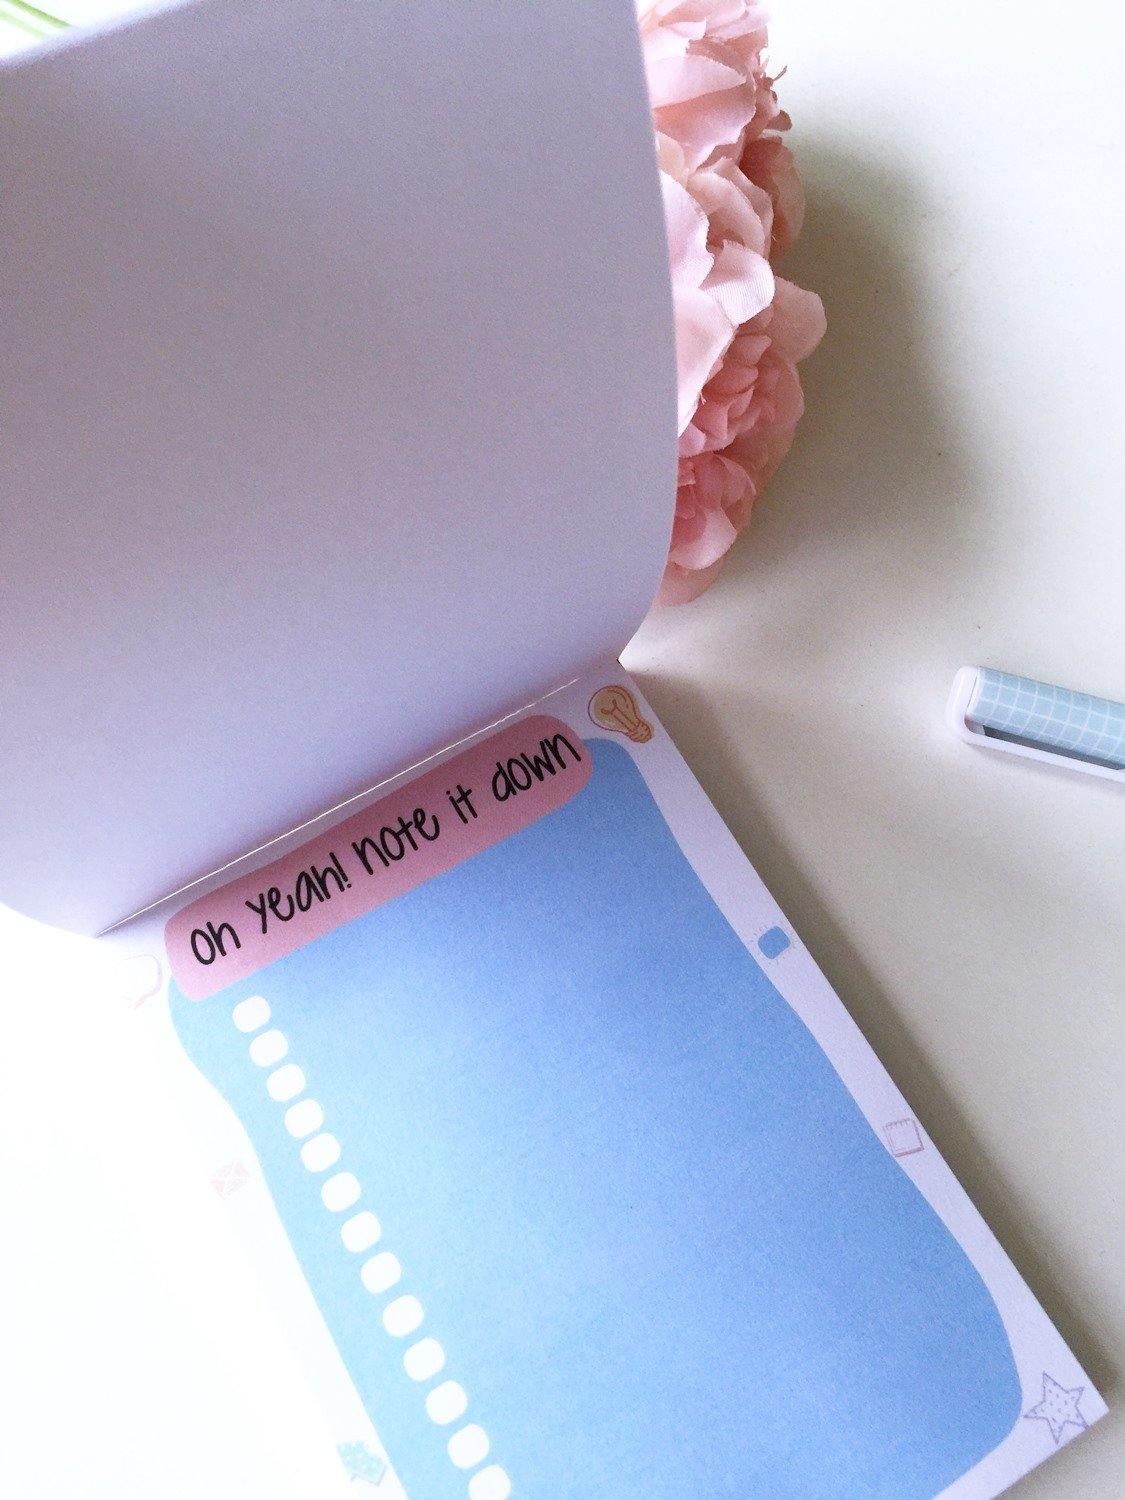 Bonny Blue To do List / Notepad | 50 sheets each - Supple Room